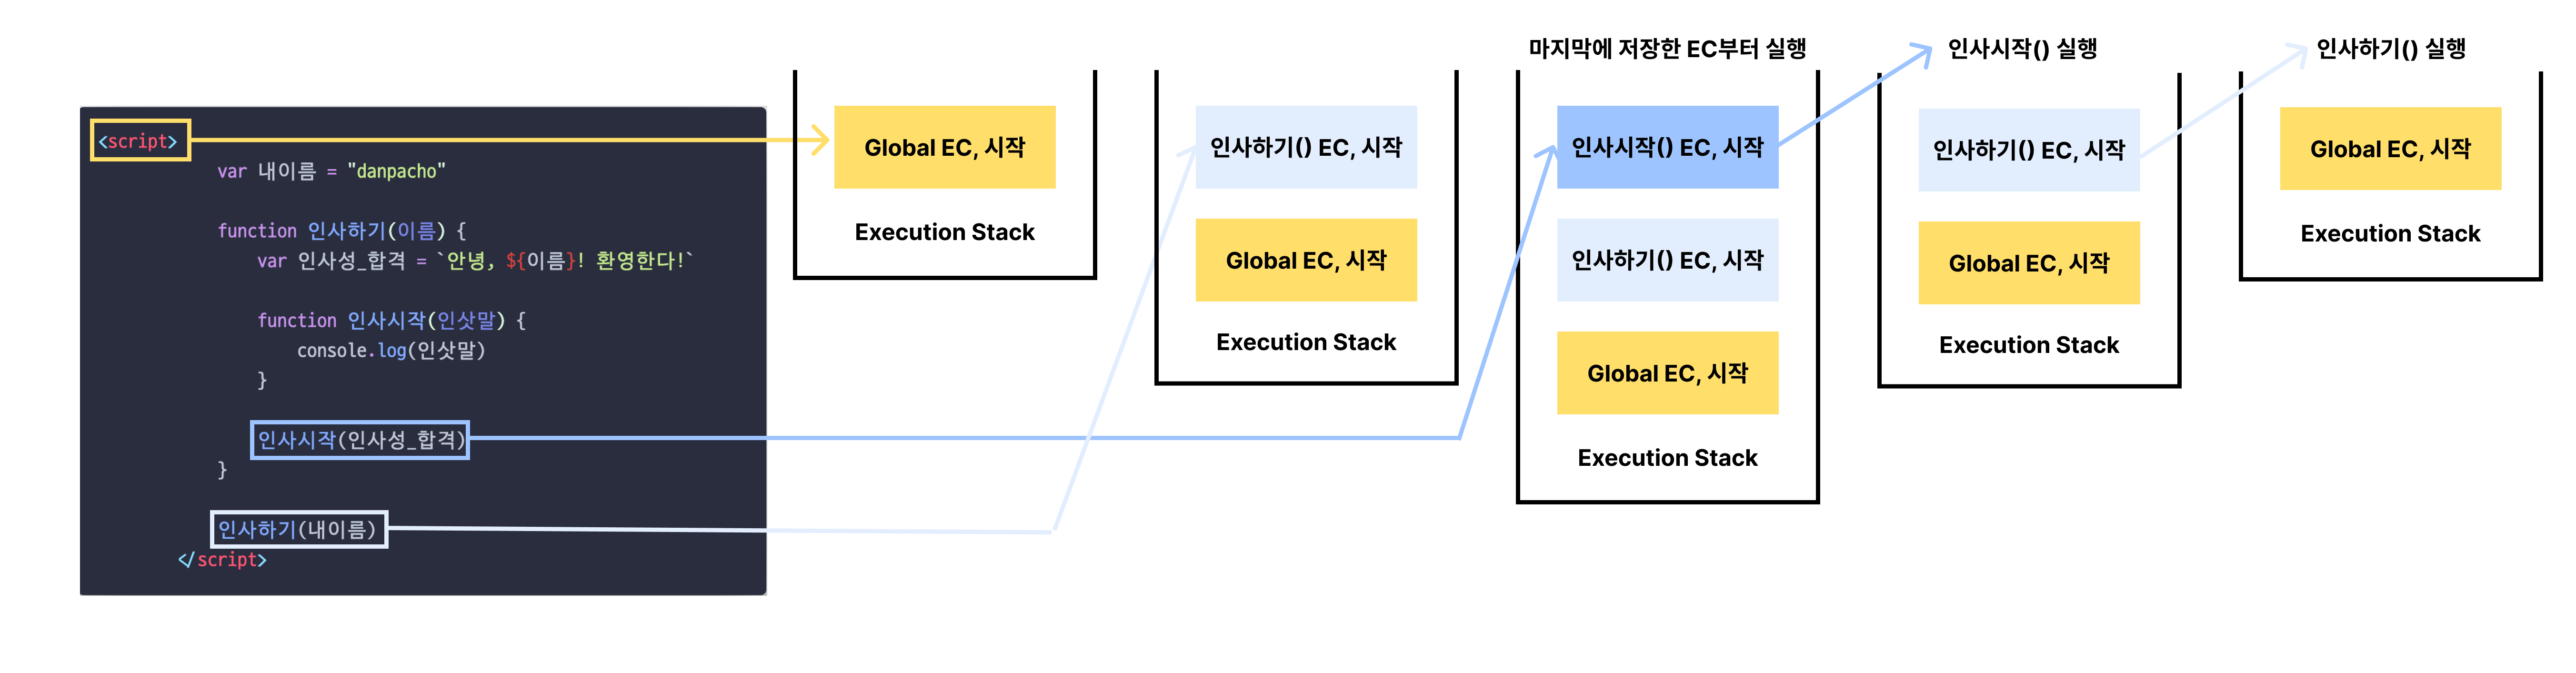 Execution Stack.png